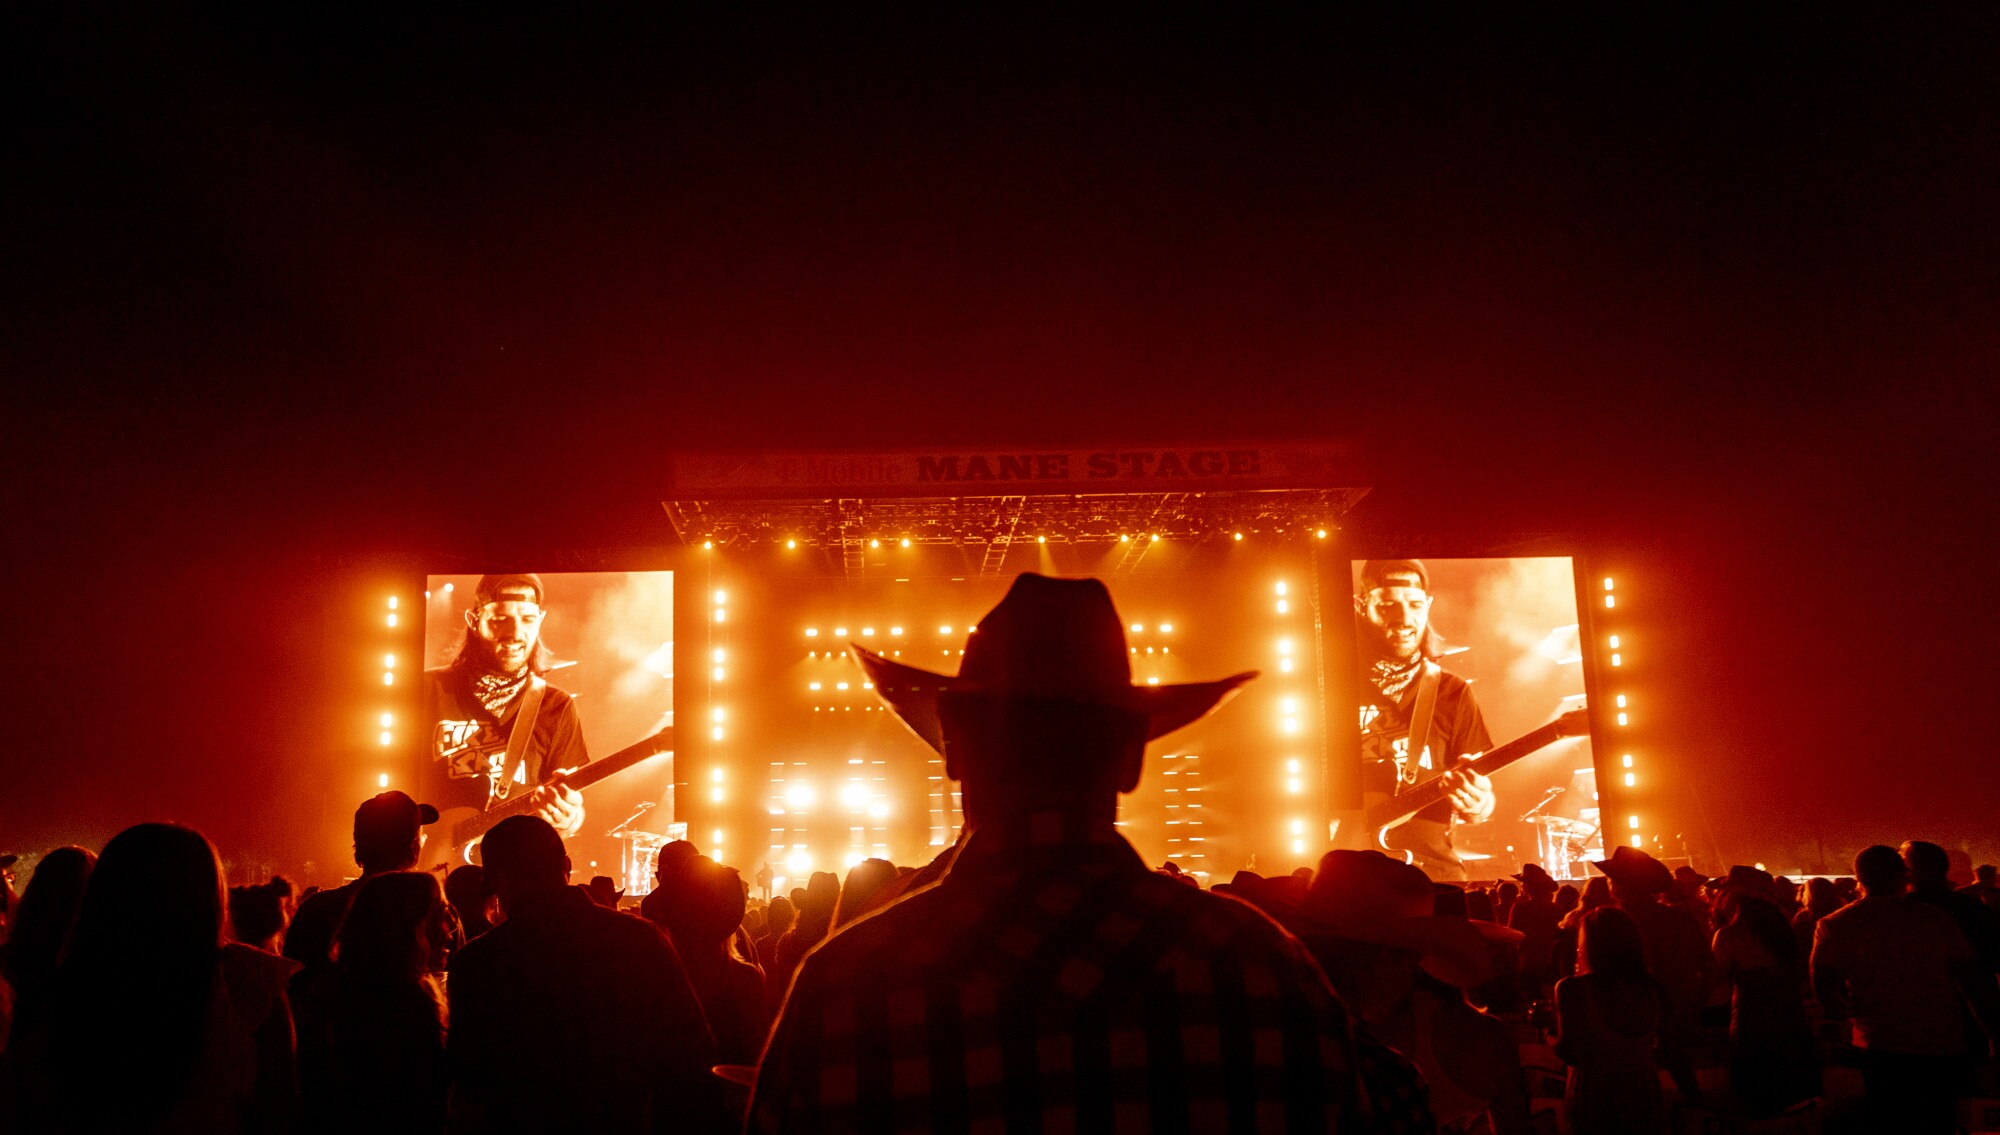 A person in a cowboy hat looks toward the brightly lit stage